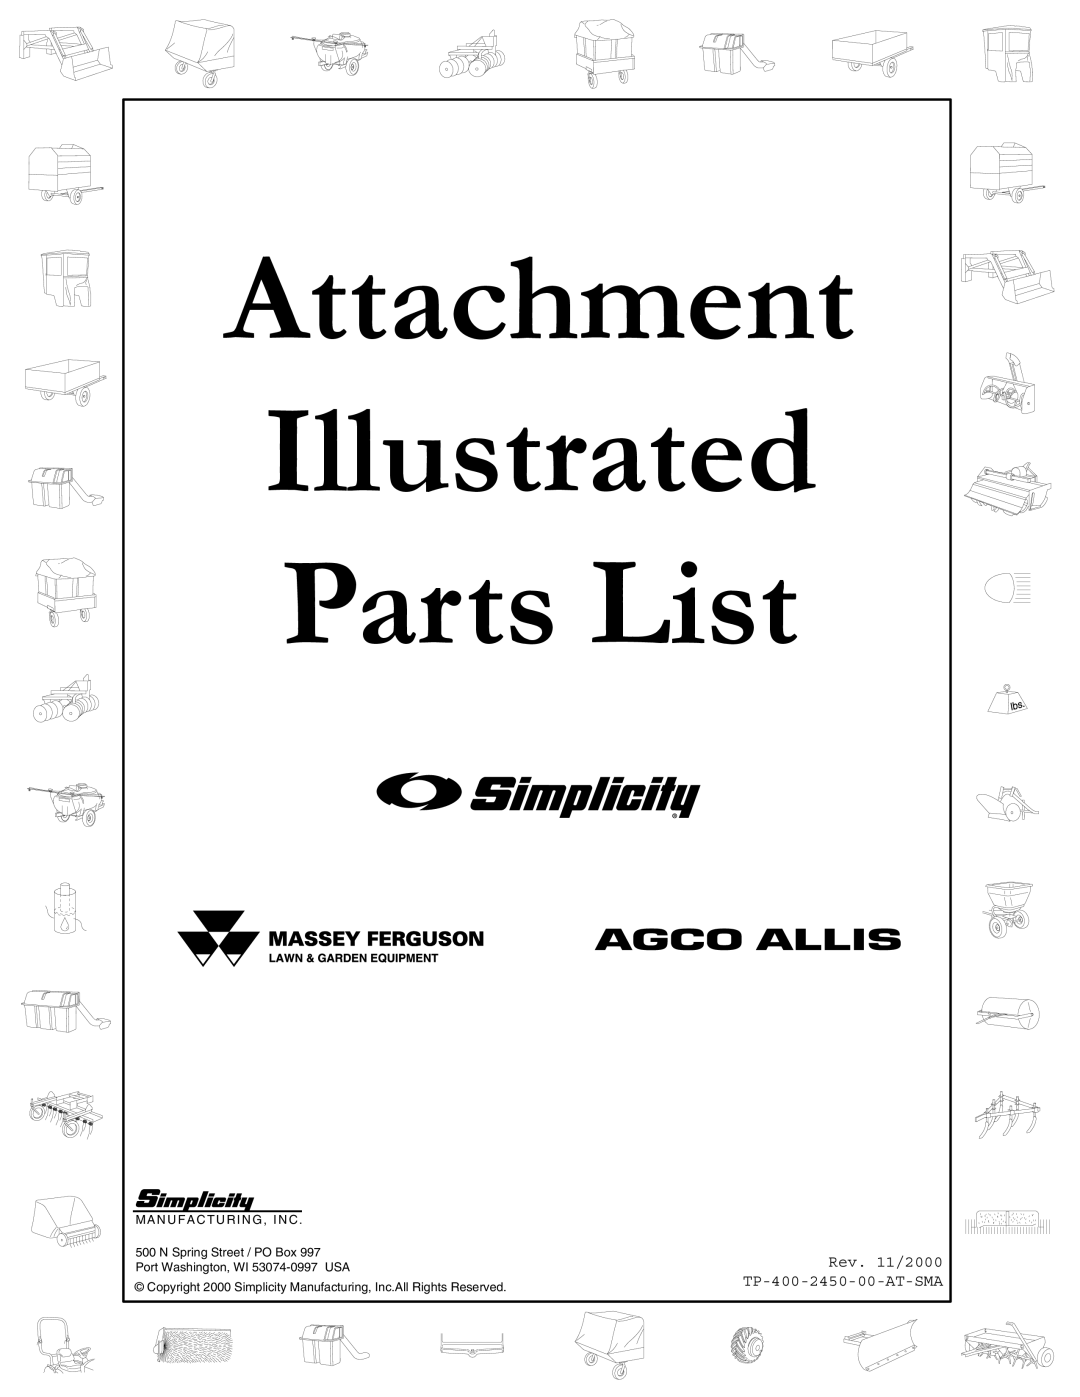 Simplicity 1692471 manual Attachment Illustrated Parts List, Rev. 11/2000 TP-400-2450-00-AT-SMA, N Spring Street / PO Box 